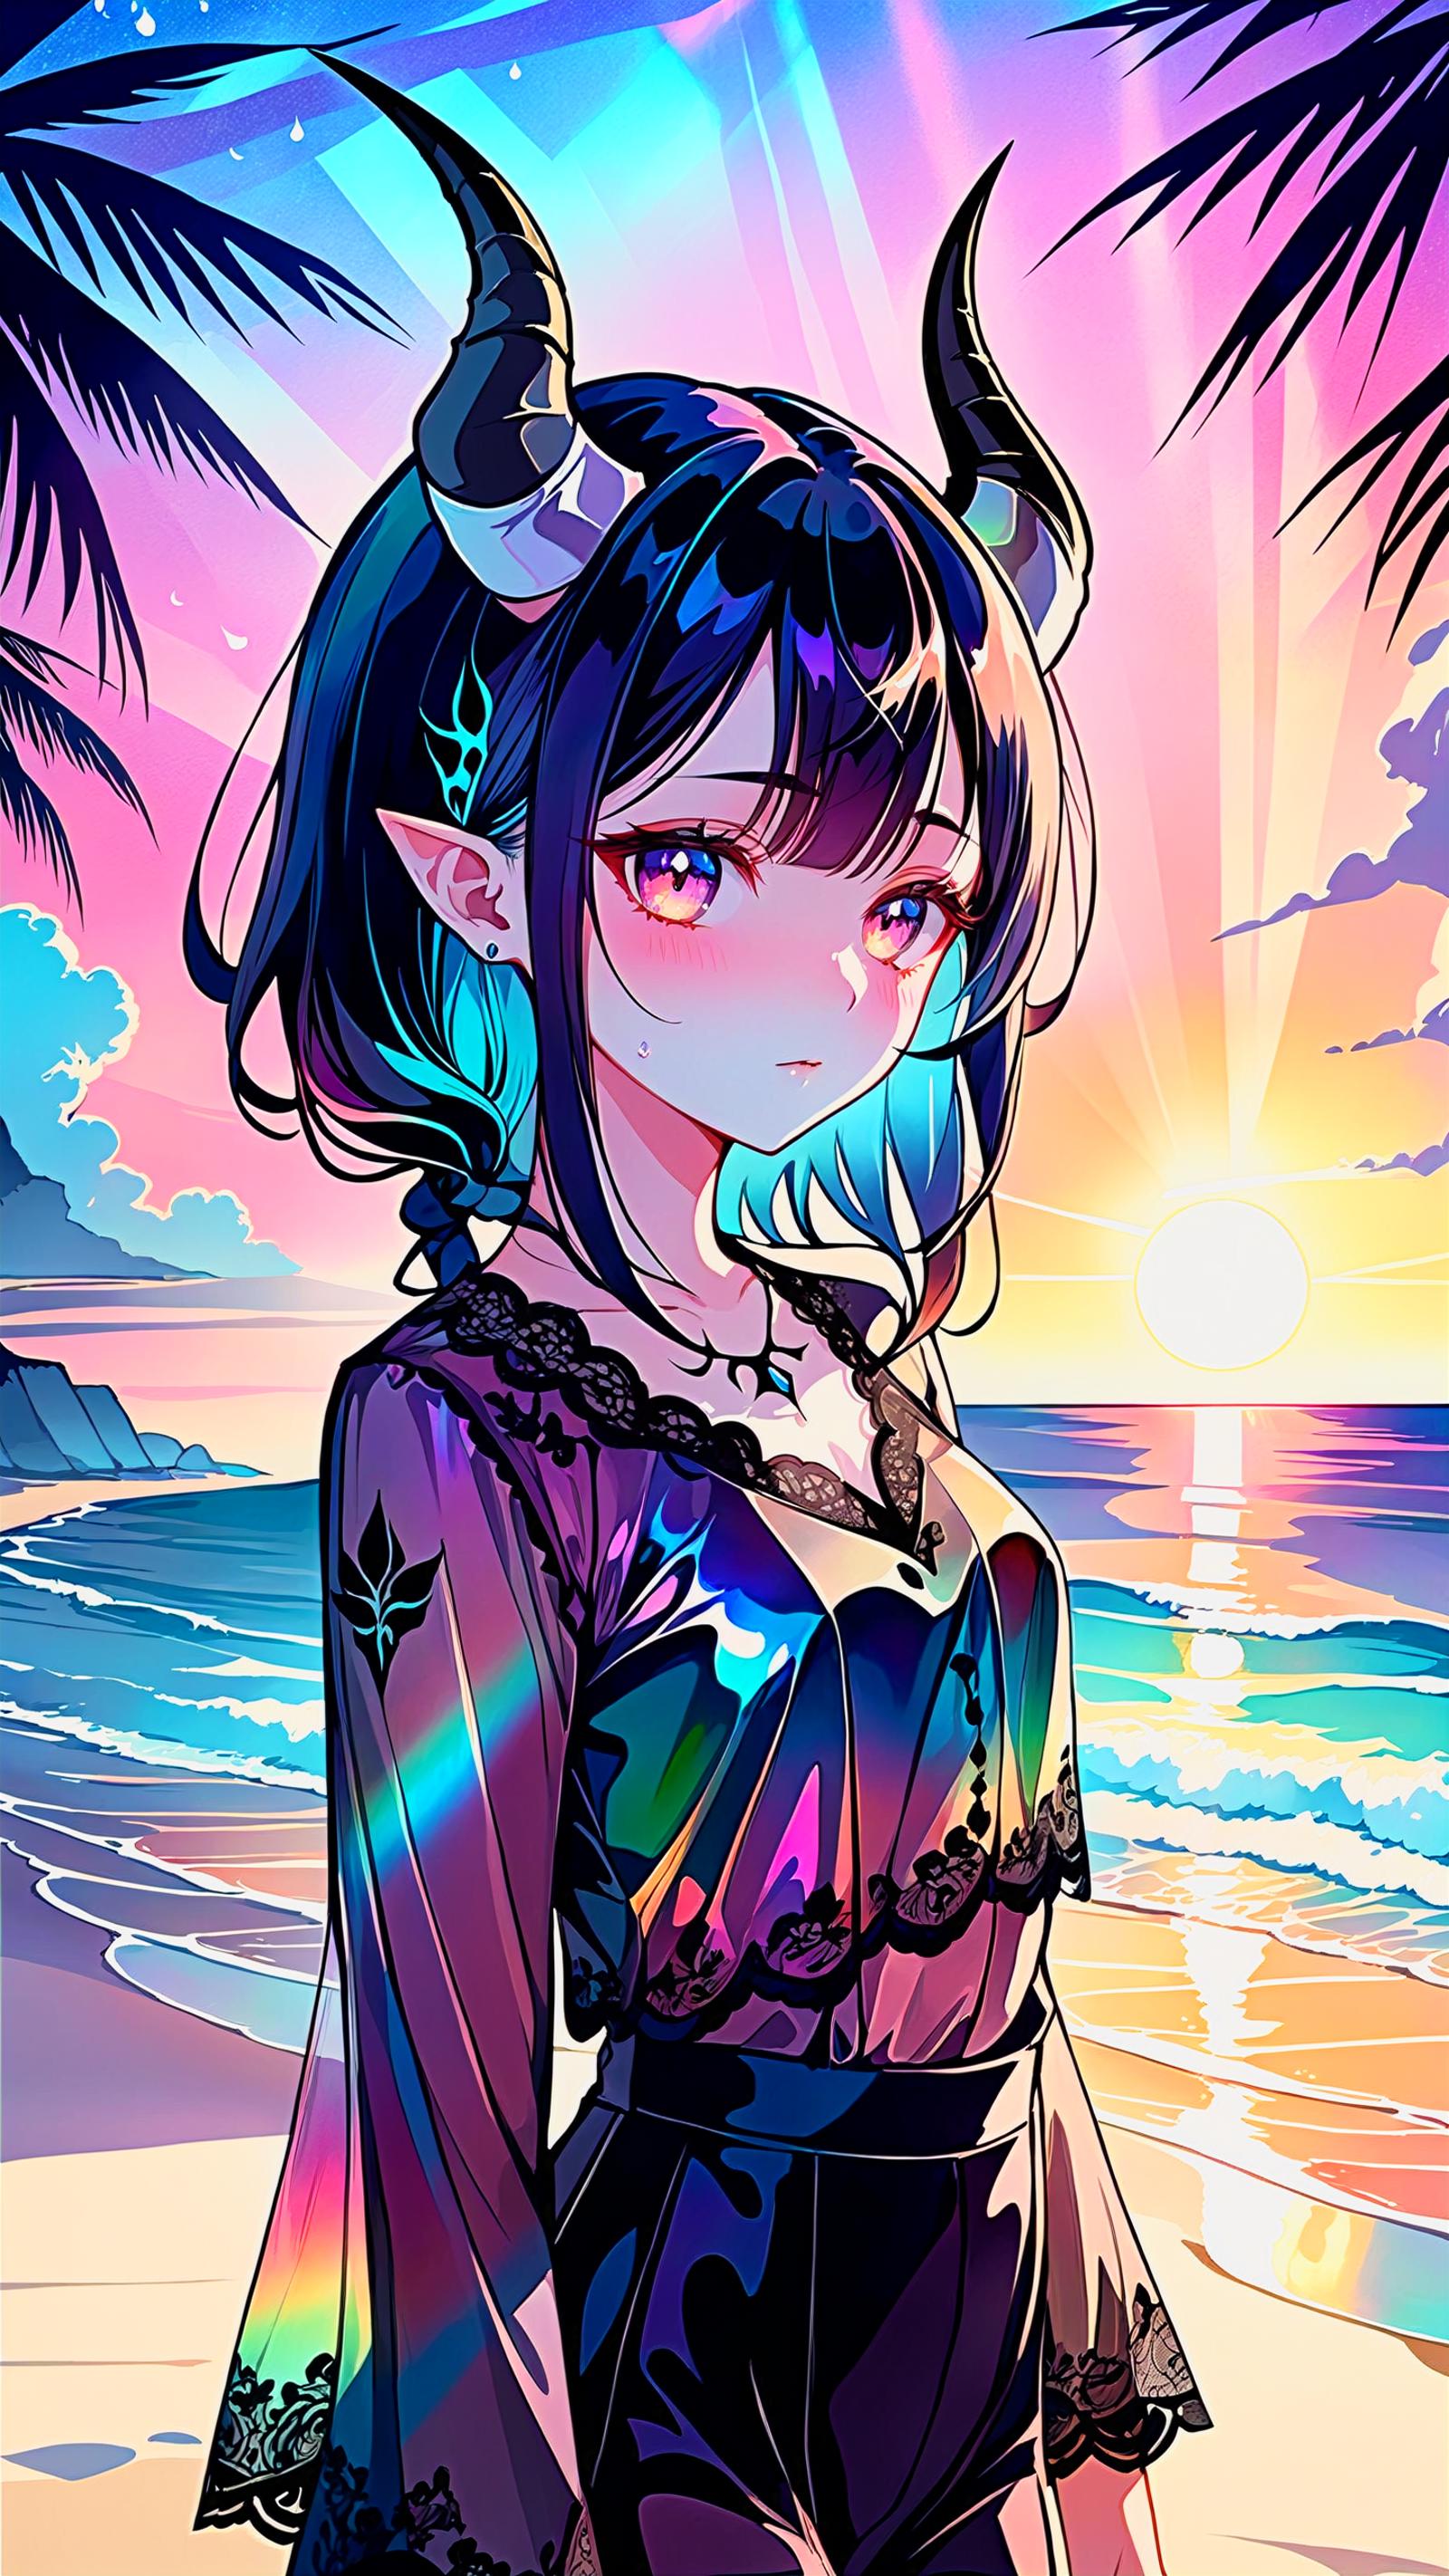 Anime girl with horns and a sunset in the background.